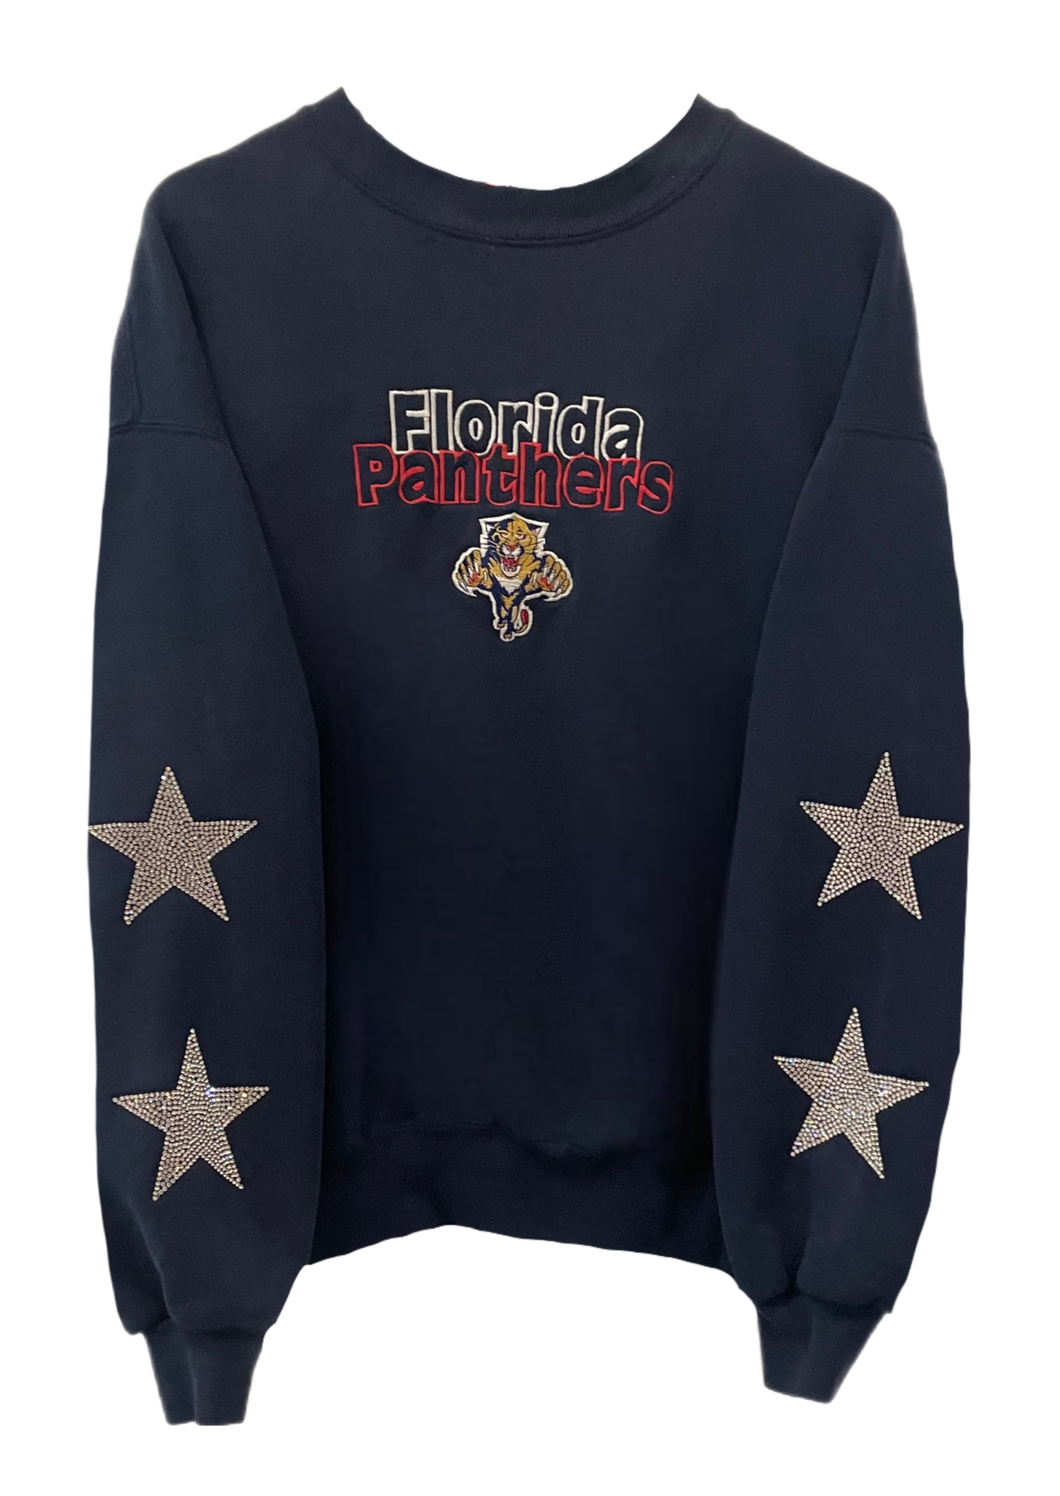 Florida Panthers, NHL One of a KIND Vintage Sweatshirt with Crystal Star Design And Custom Name & Number